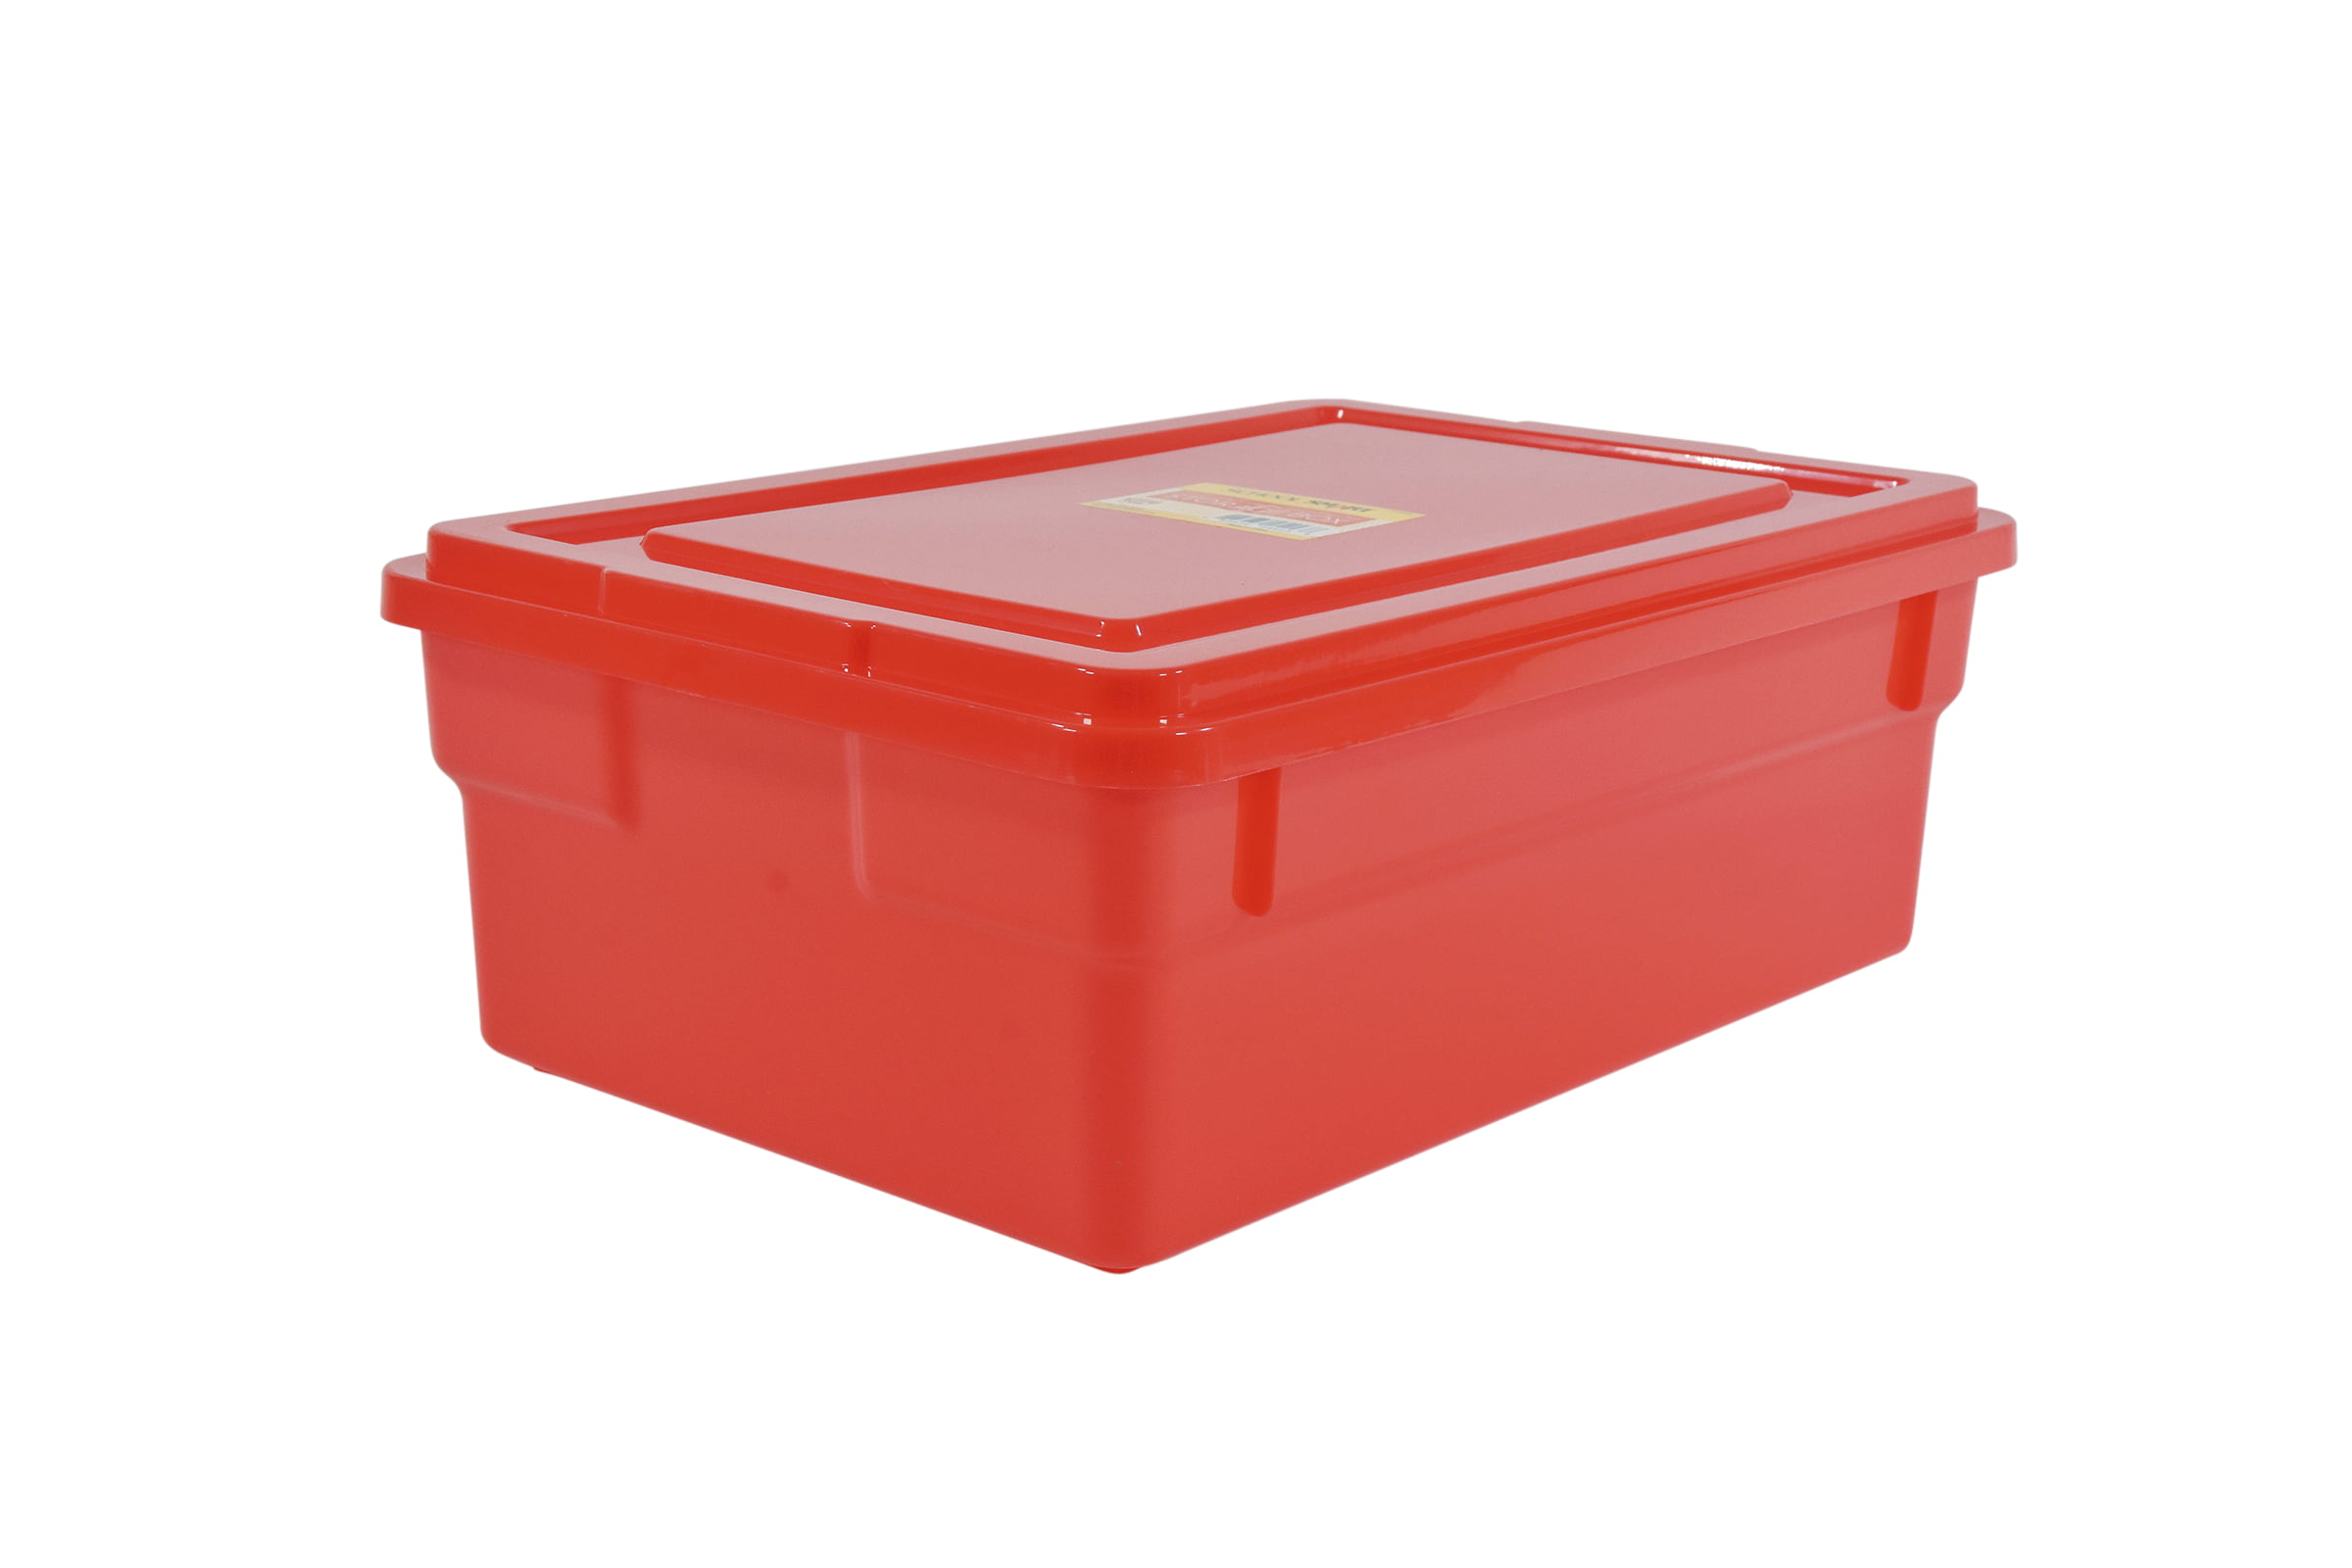 School Smart 1576286 Storage Box with Lid Clear 16 x 11 x 6 in